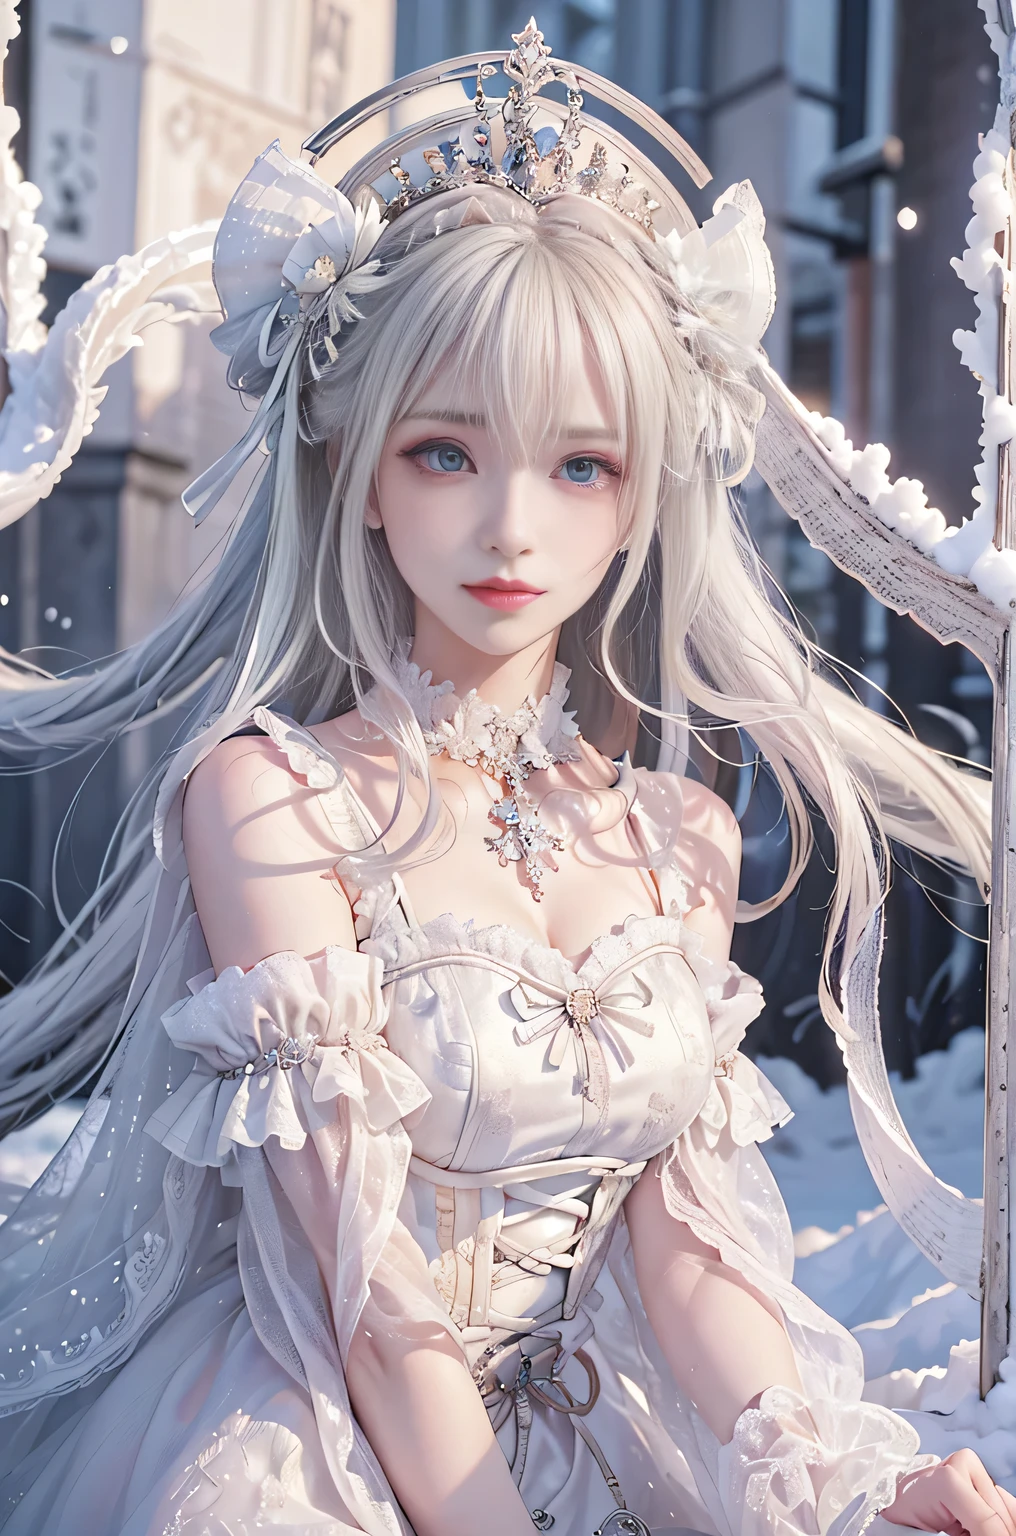 ((masterpiece:1.5,highest quality,Highly detailed images,Beautiful images、Realistic、Photorealistic、2.5D))(1girl, solo)(cute girl, medium breasts, white hair, aqua eyes、Beautiful big eyes、Sharp jaw、Small Nose、Narrow waist、Thin legs、Ideal body type、The collarbone is beautiful)(lolita fashion、Cape、Monotone clothes、Snow Field、Gothic Style)(Beautiful, shining hair, floating hair)(heavy snow、dead tree)
